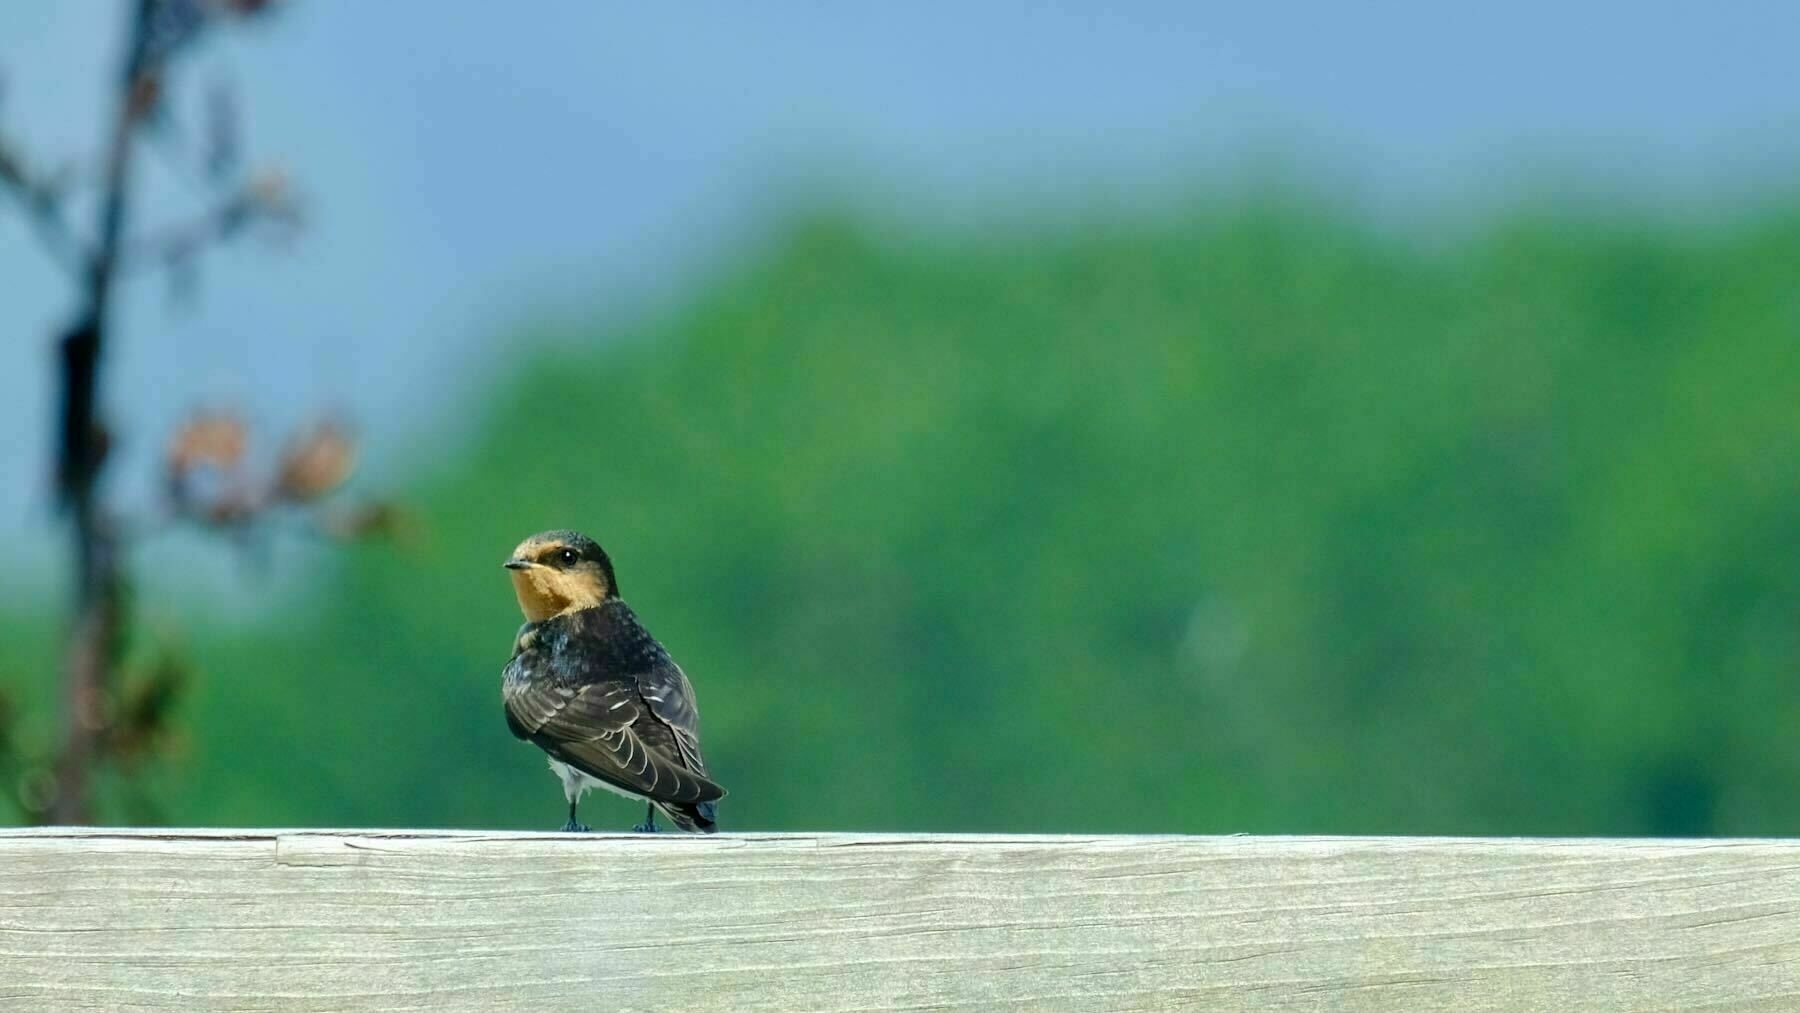 Swallow on the railing  6